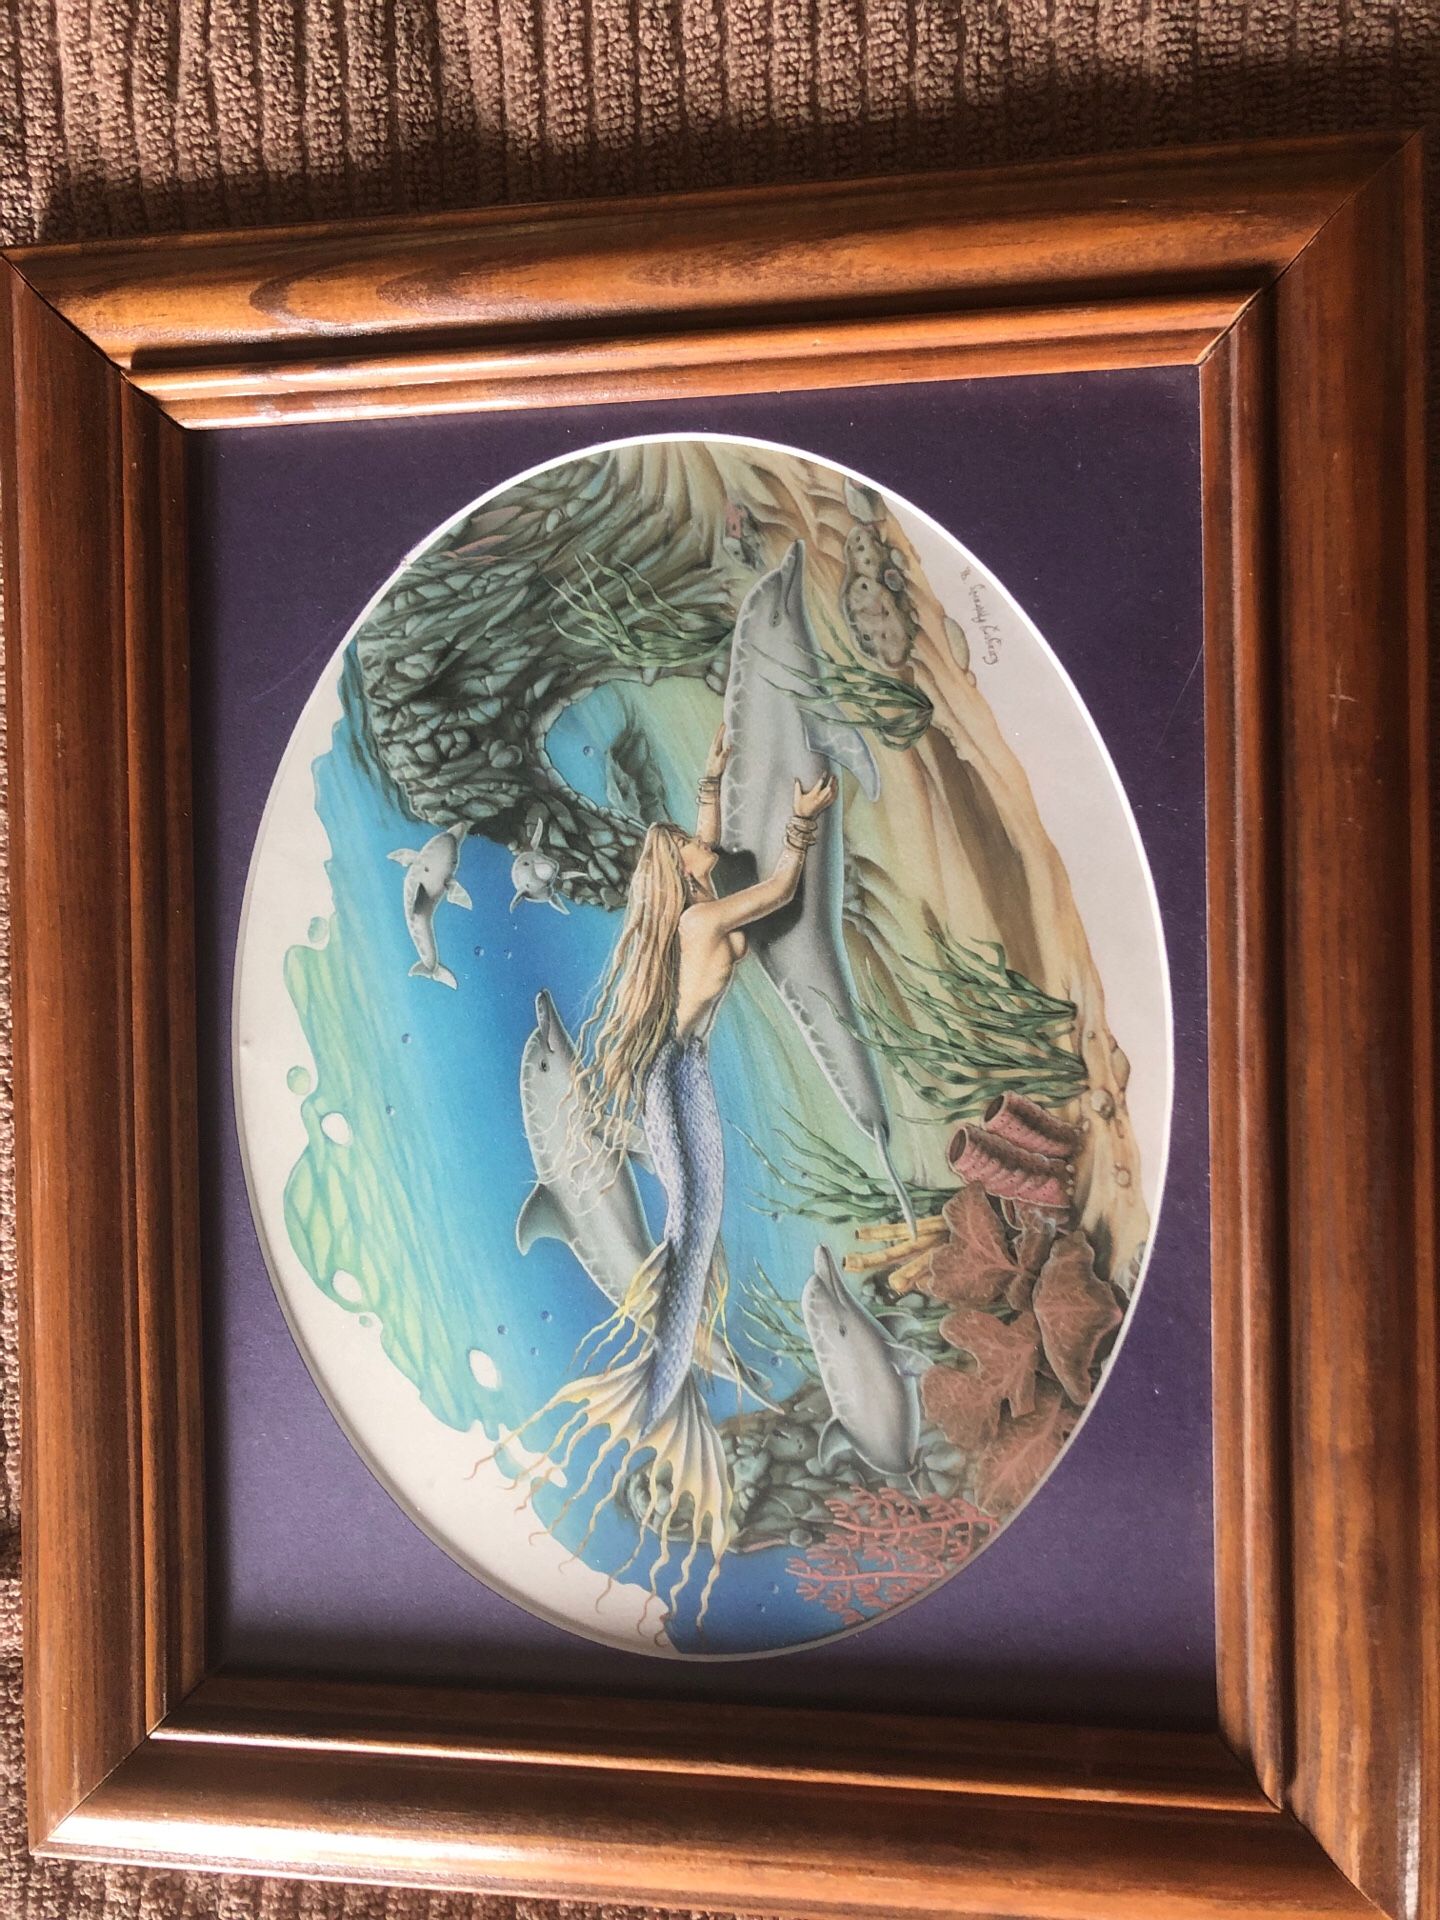 Mermaid and dolphins- 12.5x 10.5